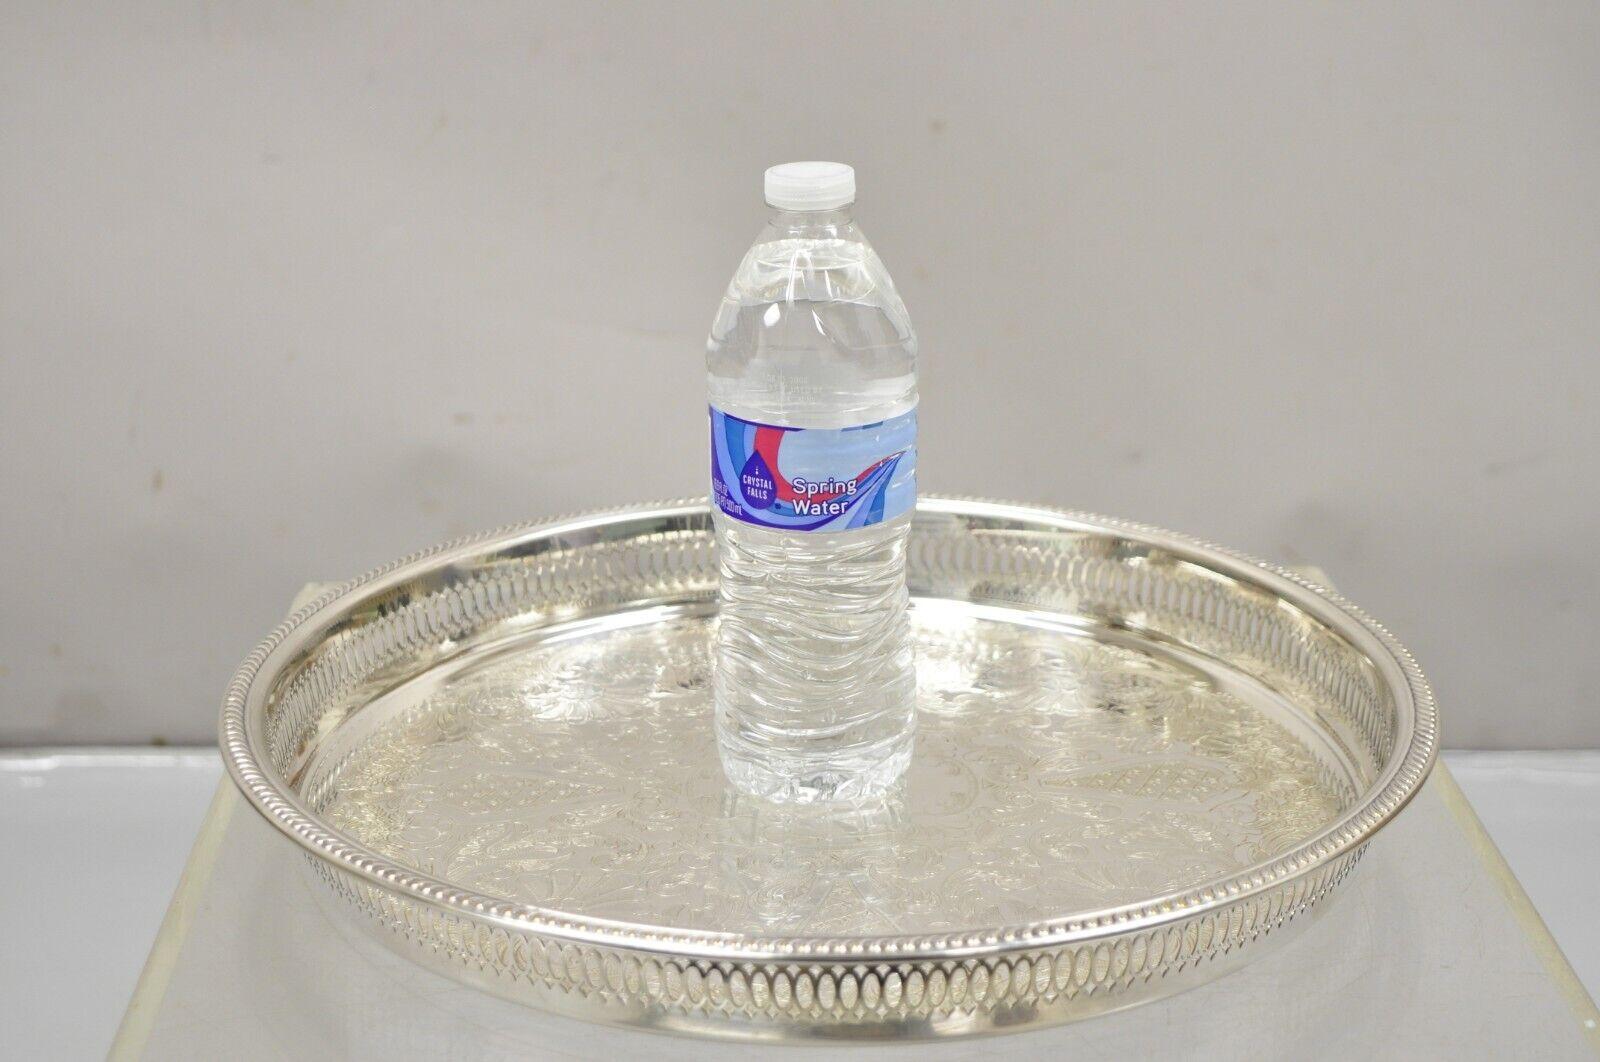 Vintage W B Rogers Silver Co Silver Plated Pierced Gallery 15” Serving Platter Tray. Item features an ornate etched center, raised pierced gallery, original hallmark. Circa Mid 20th Century. Measurements:  1.5